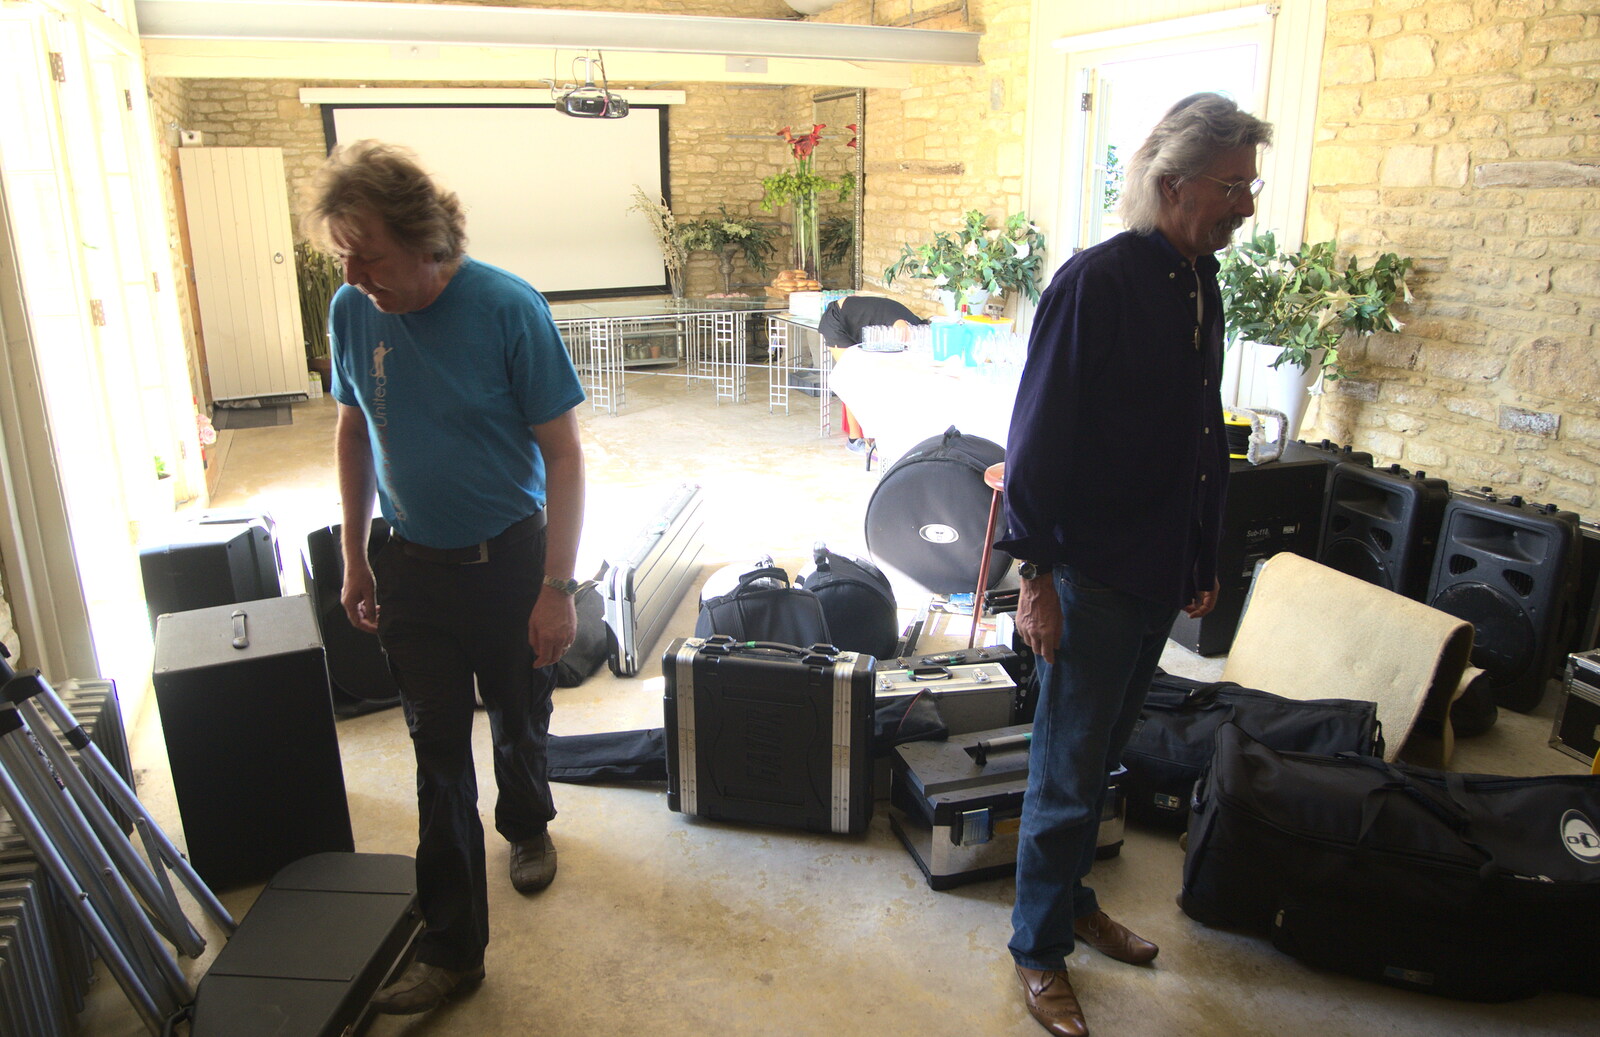 Max and Rob unpack stuff from The BBs' Last Tango in Tewkesbury, Middle Stanley, Gloucestershire - 23rd July 2016